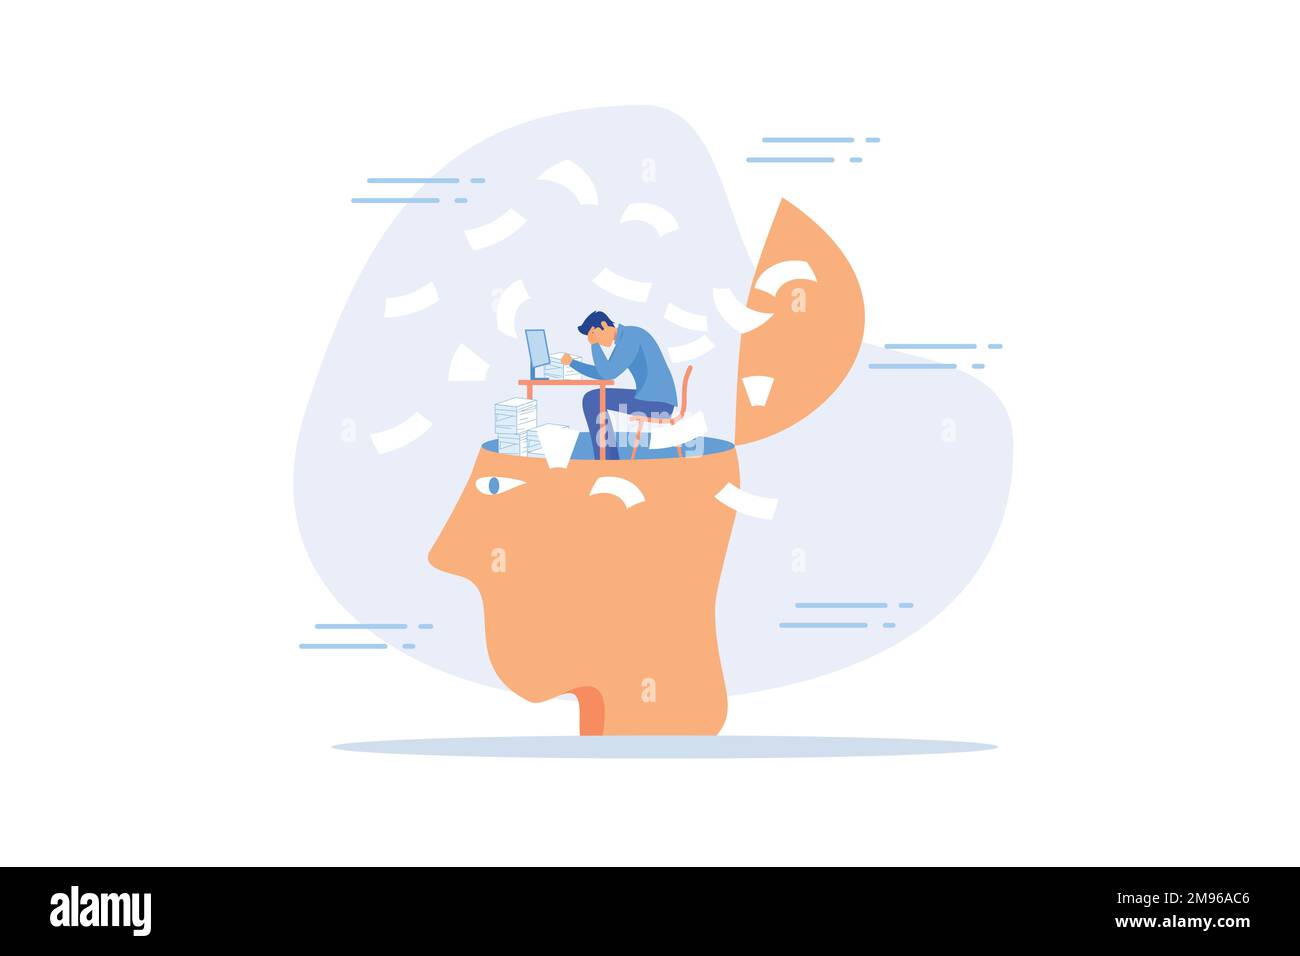 Work anxiety, stress or burnout, exhausted job or overload tired, job fatigue from overworked, depression and mental health concept, flat vector moder Stock Vector